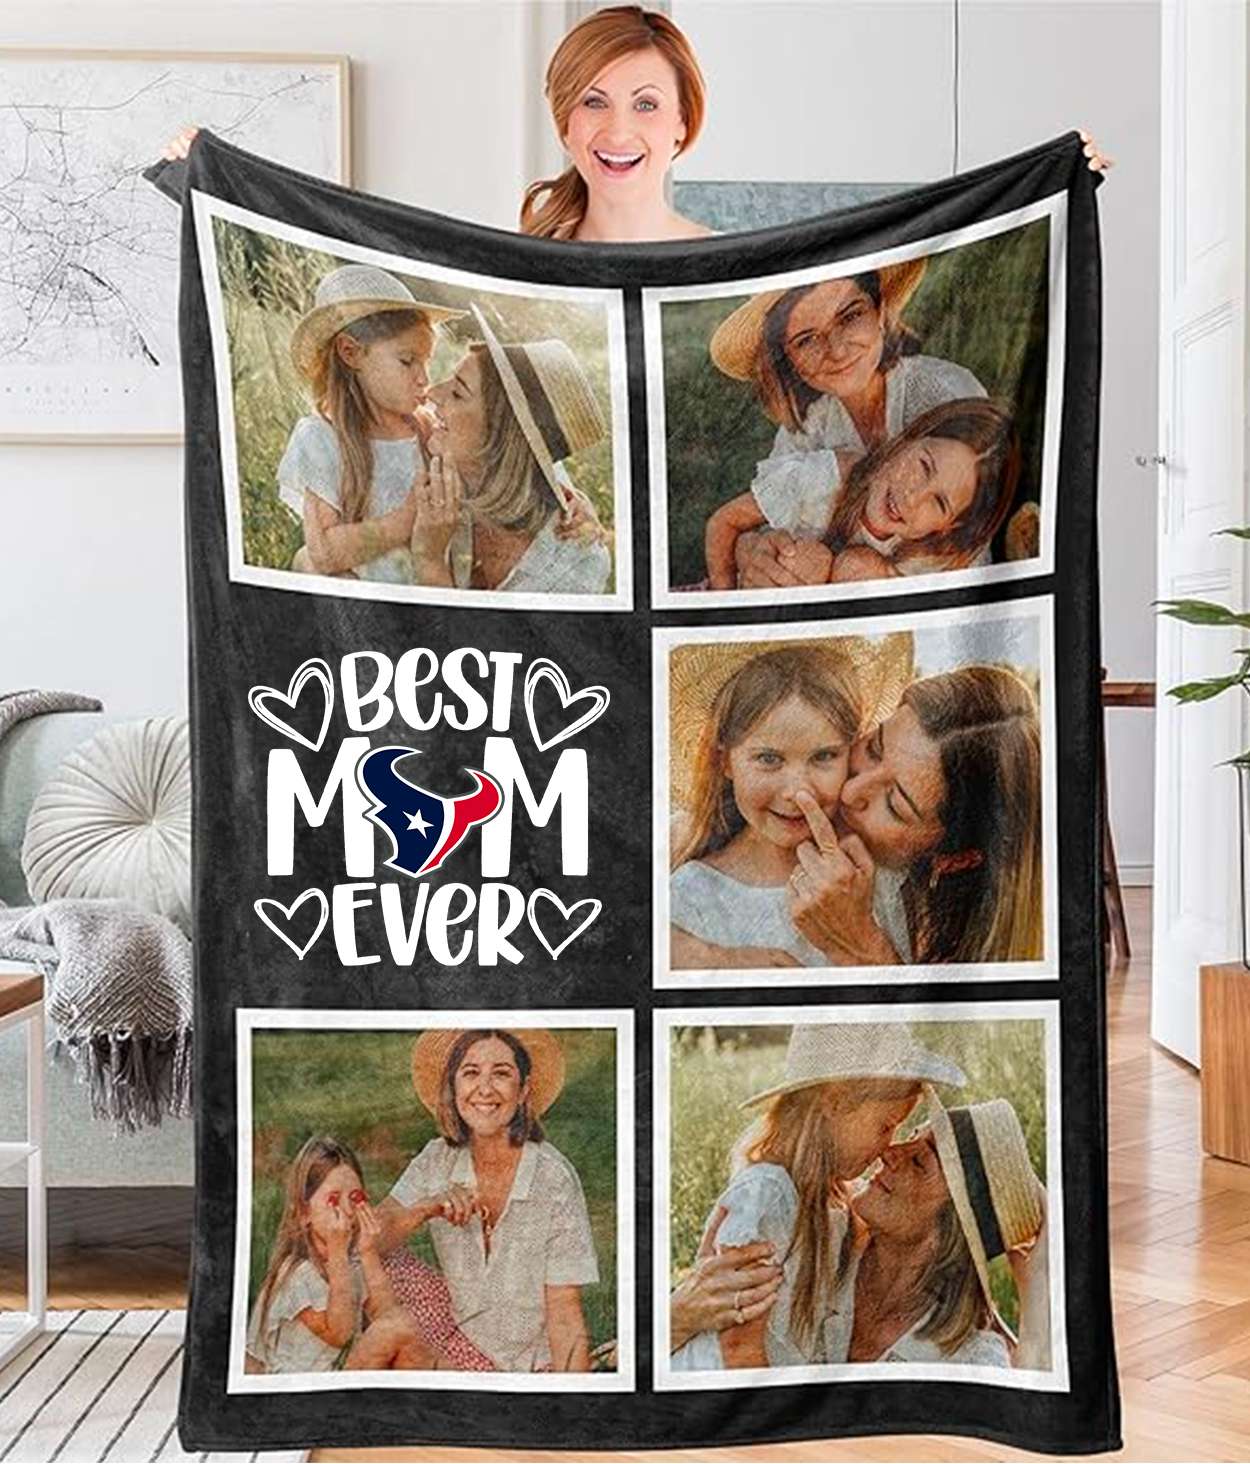 Best Mom Ever - Custom NFL Houston Texans Blankets with Pictures for Mother's Day Gift